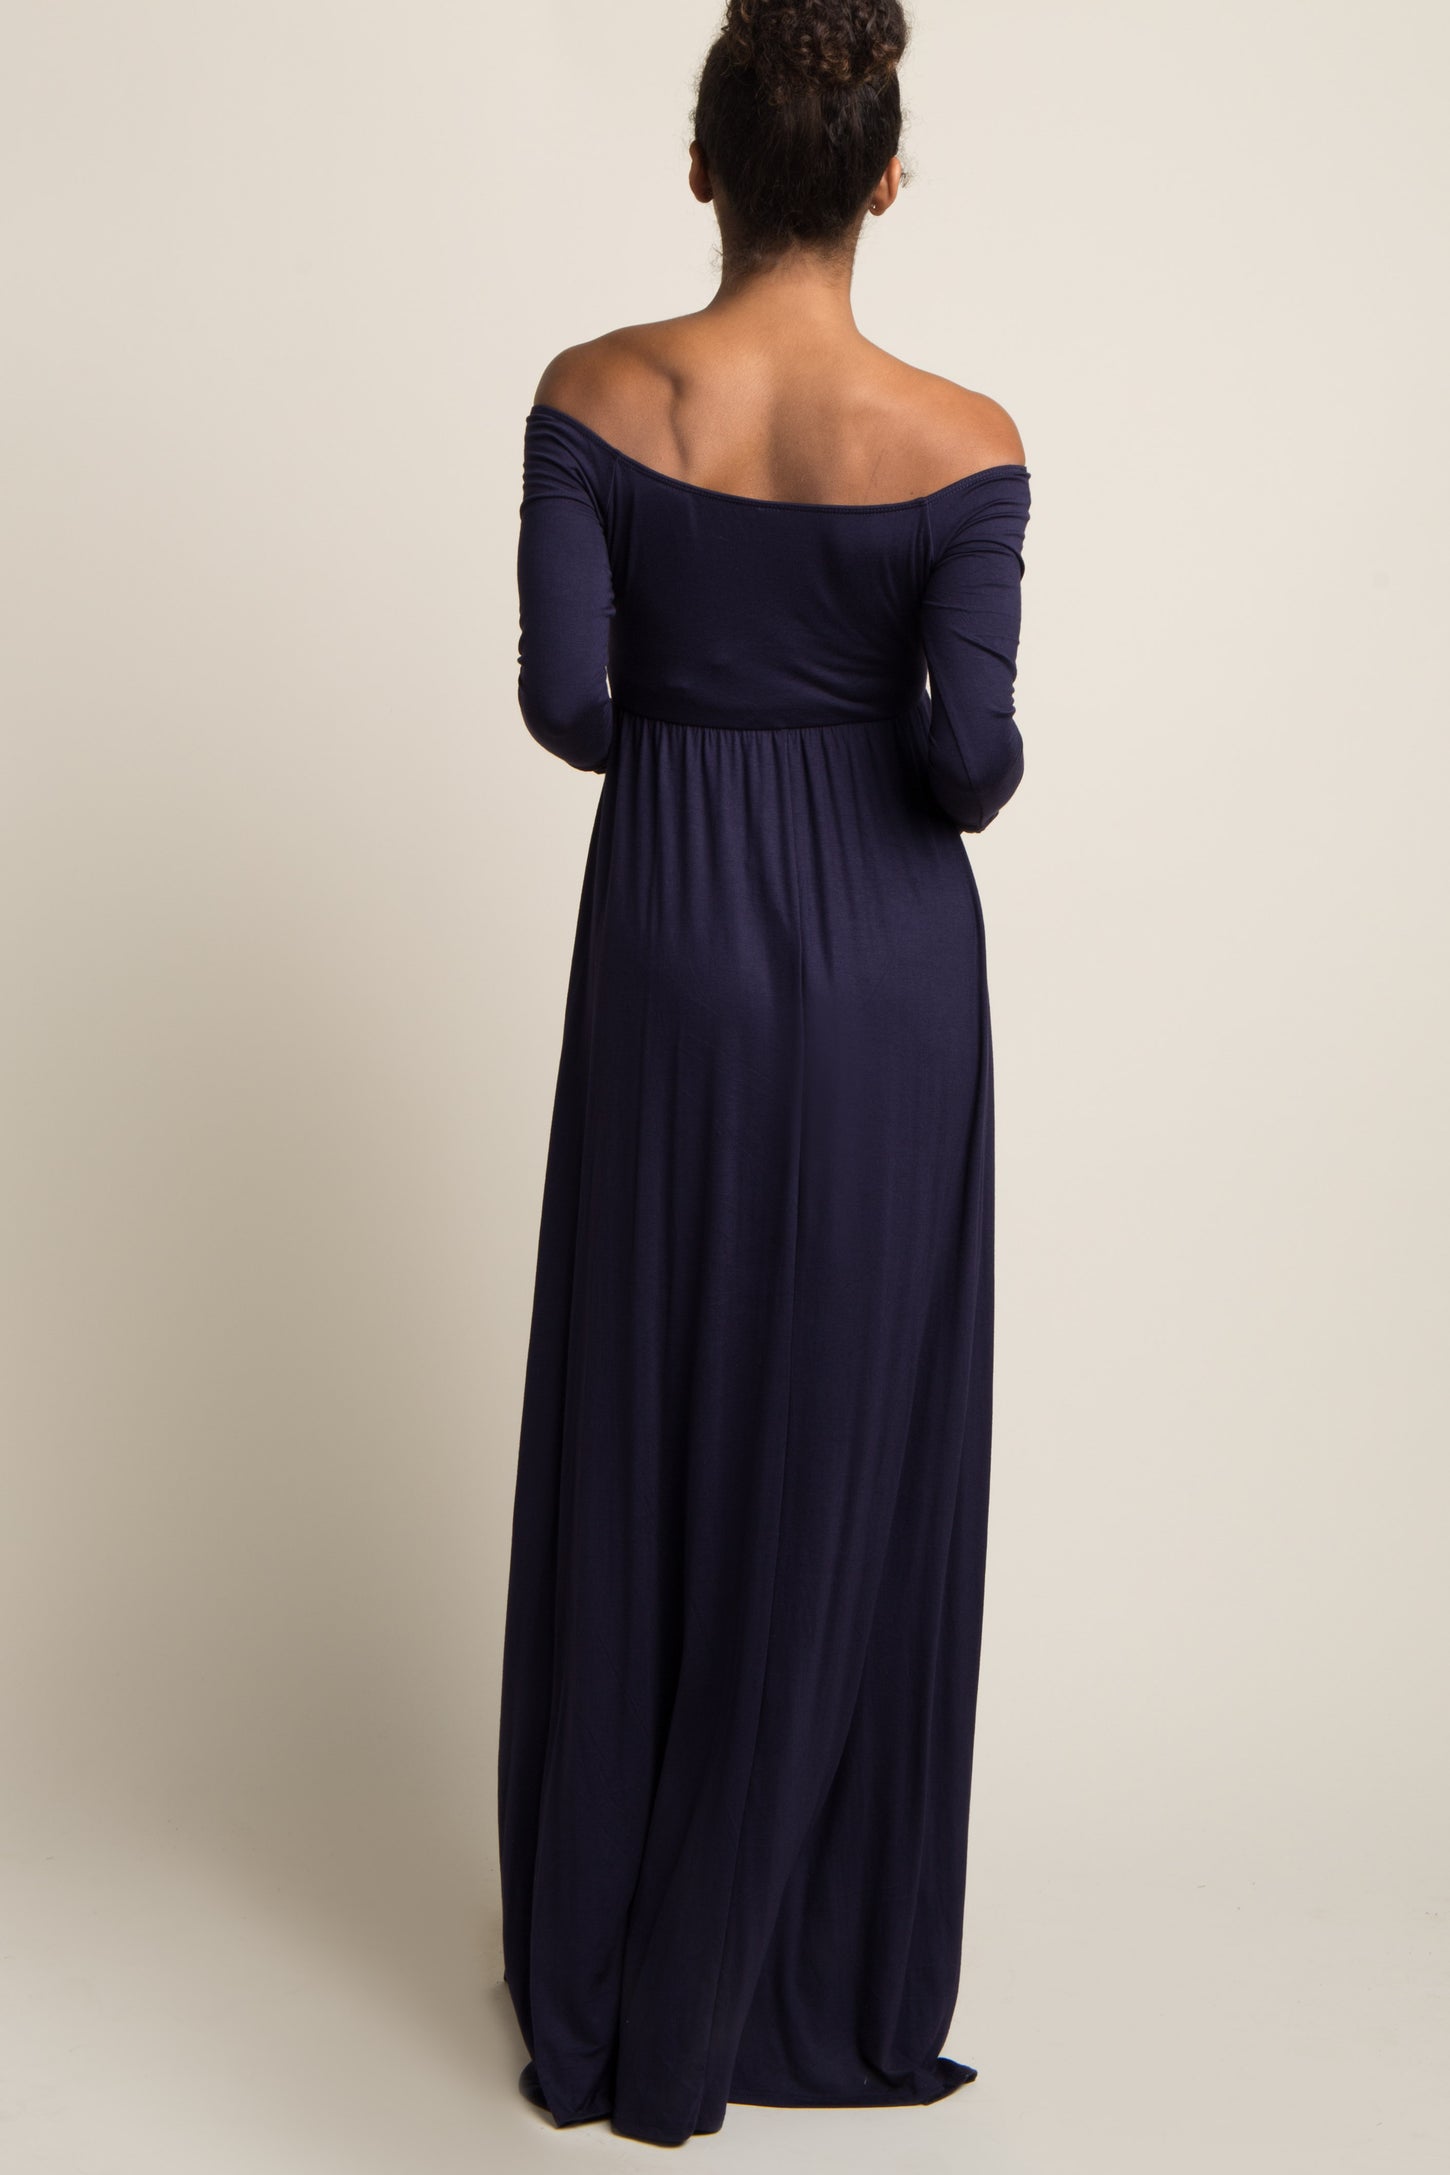 PinkBlush Navy Blue Solid Off Shoulder Maternity Maxi Dress